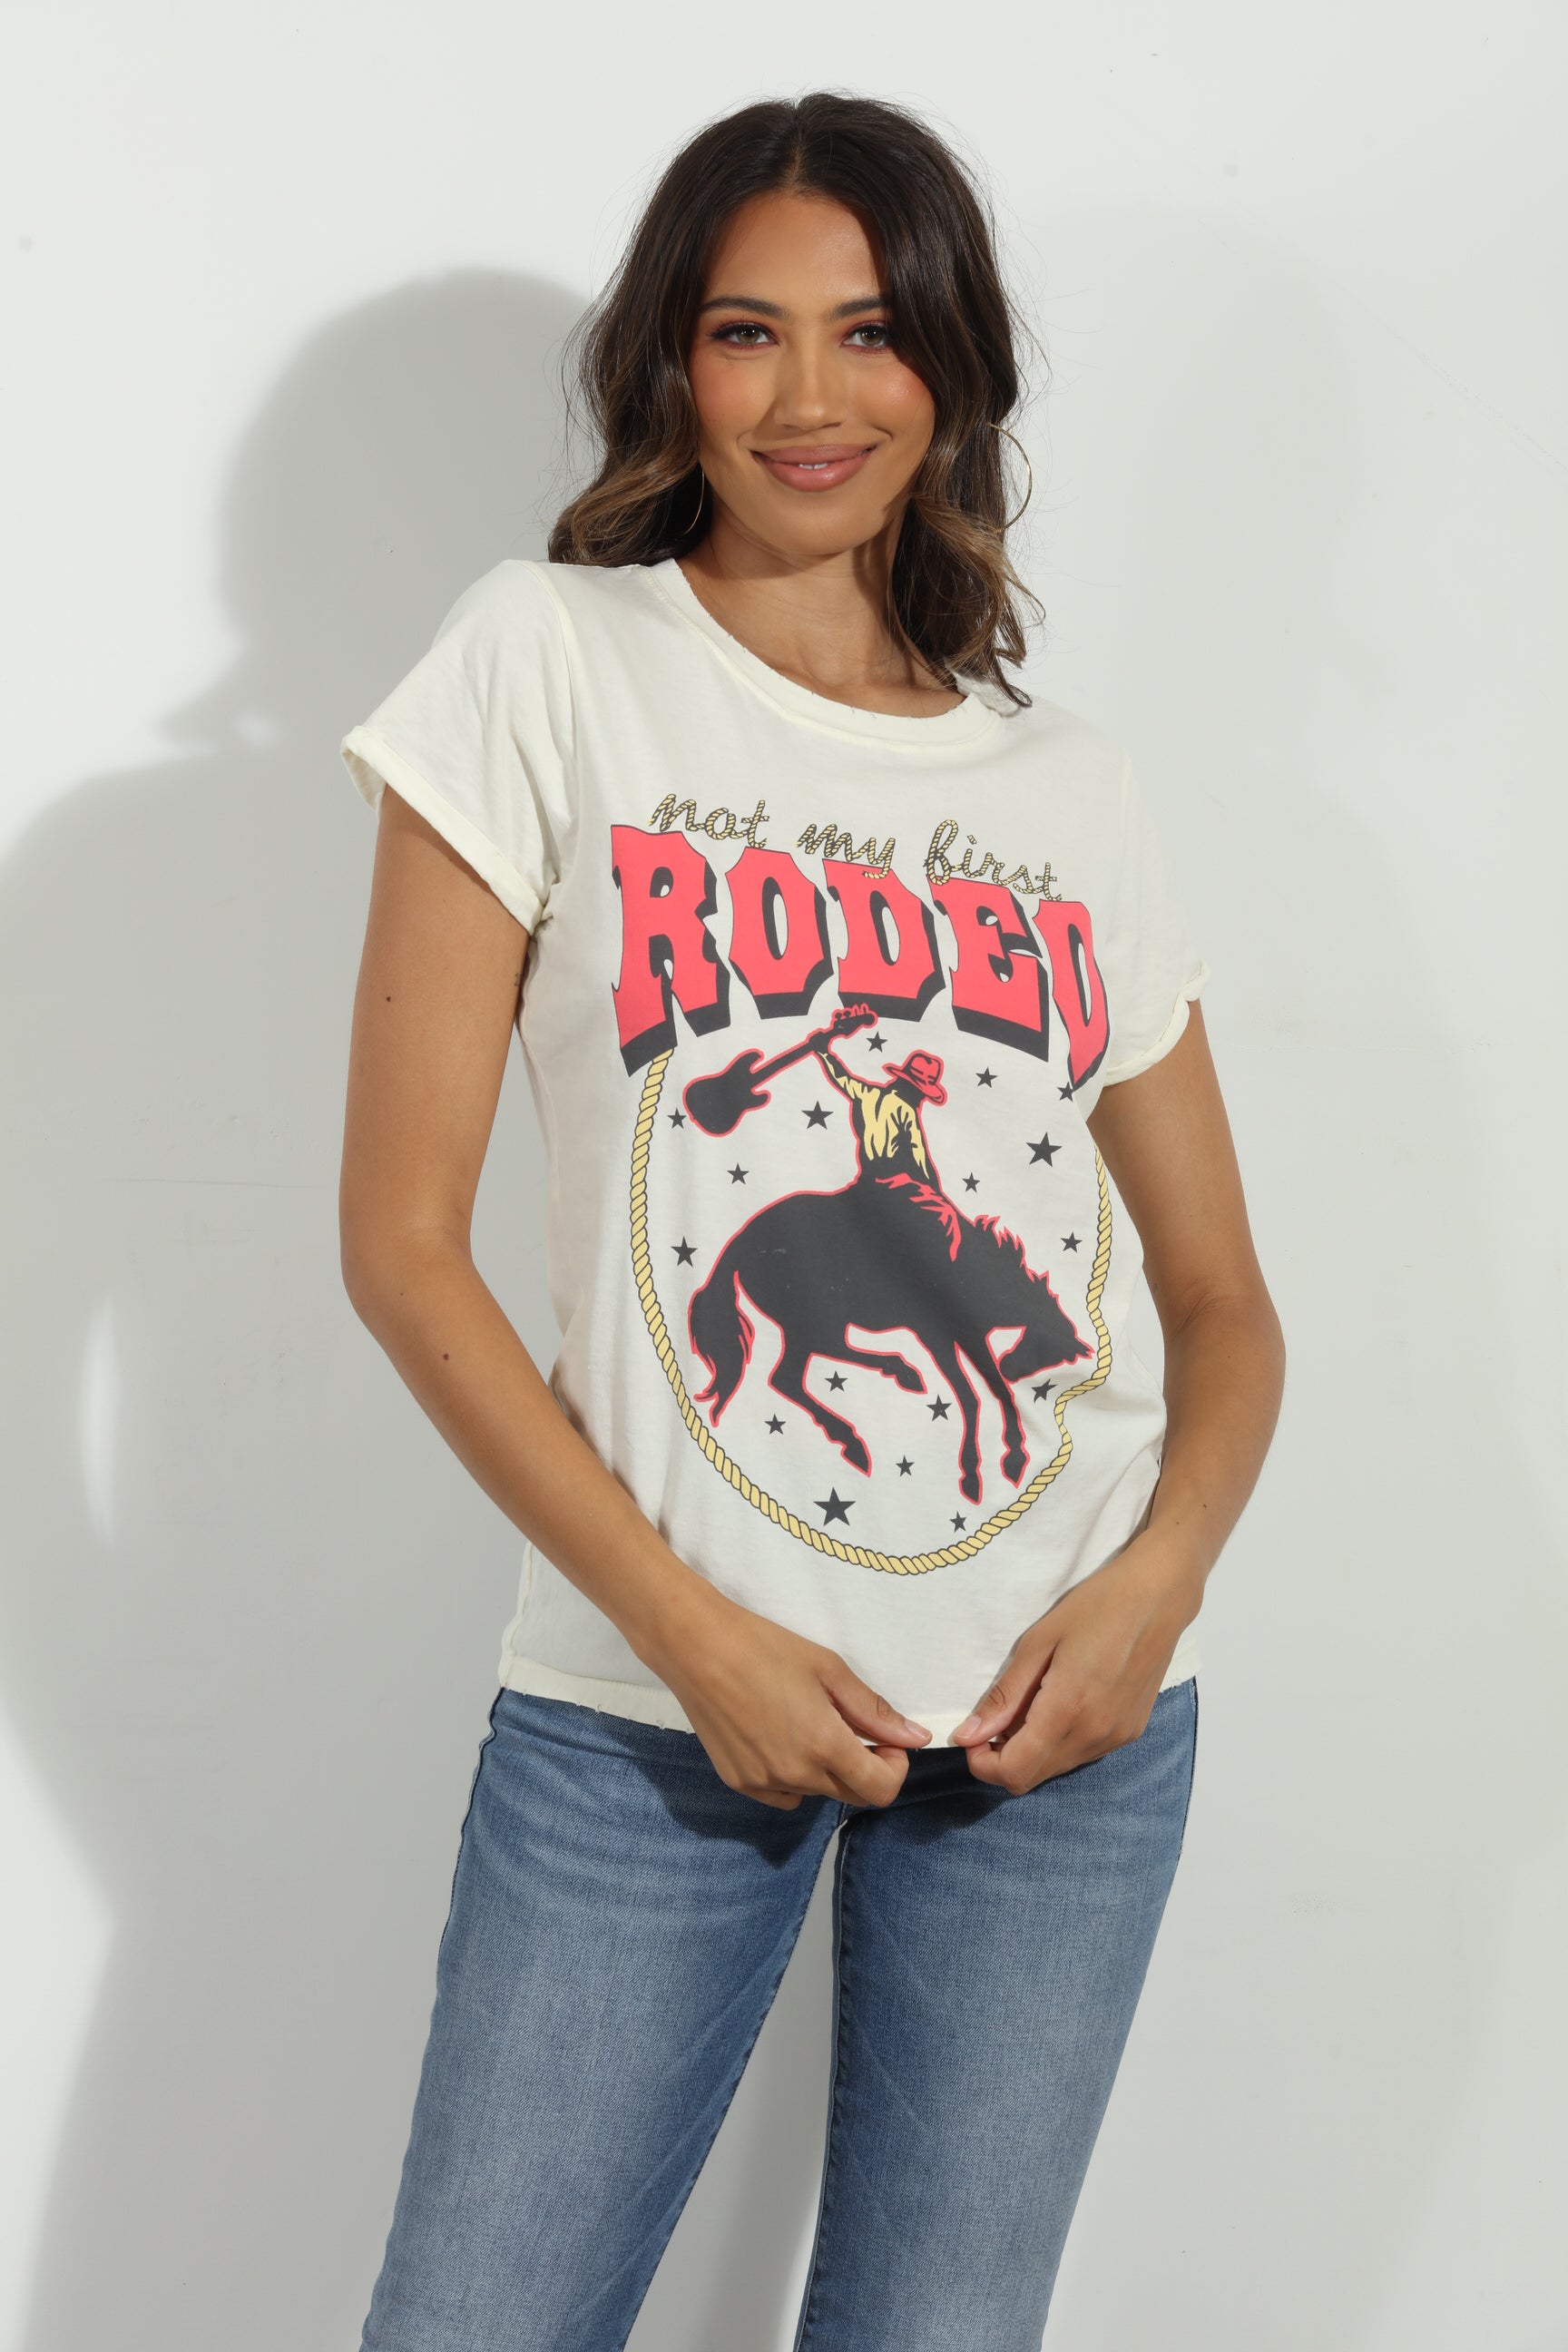 Not My First Rodeo Tee